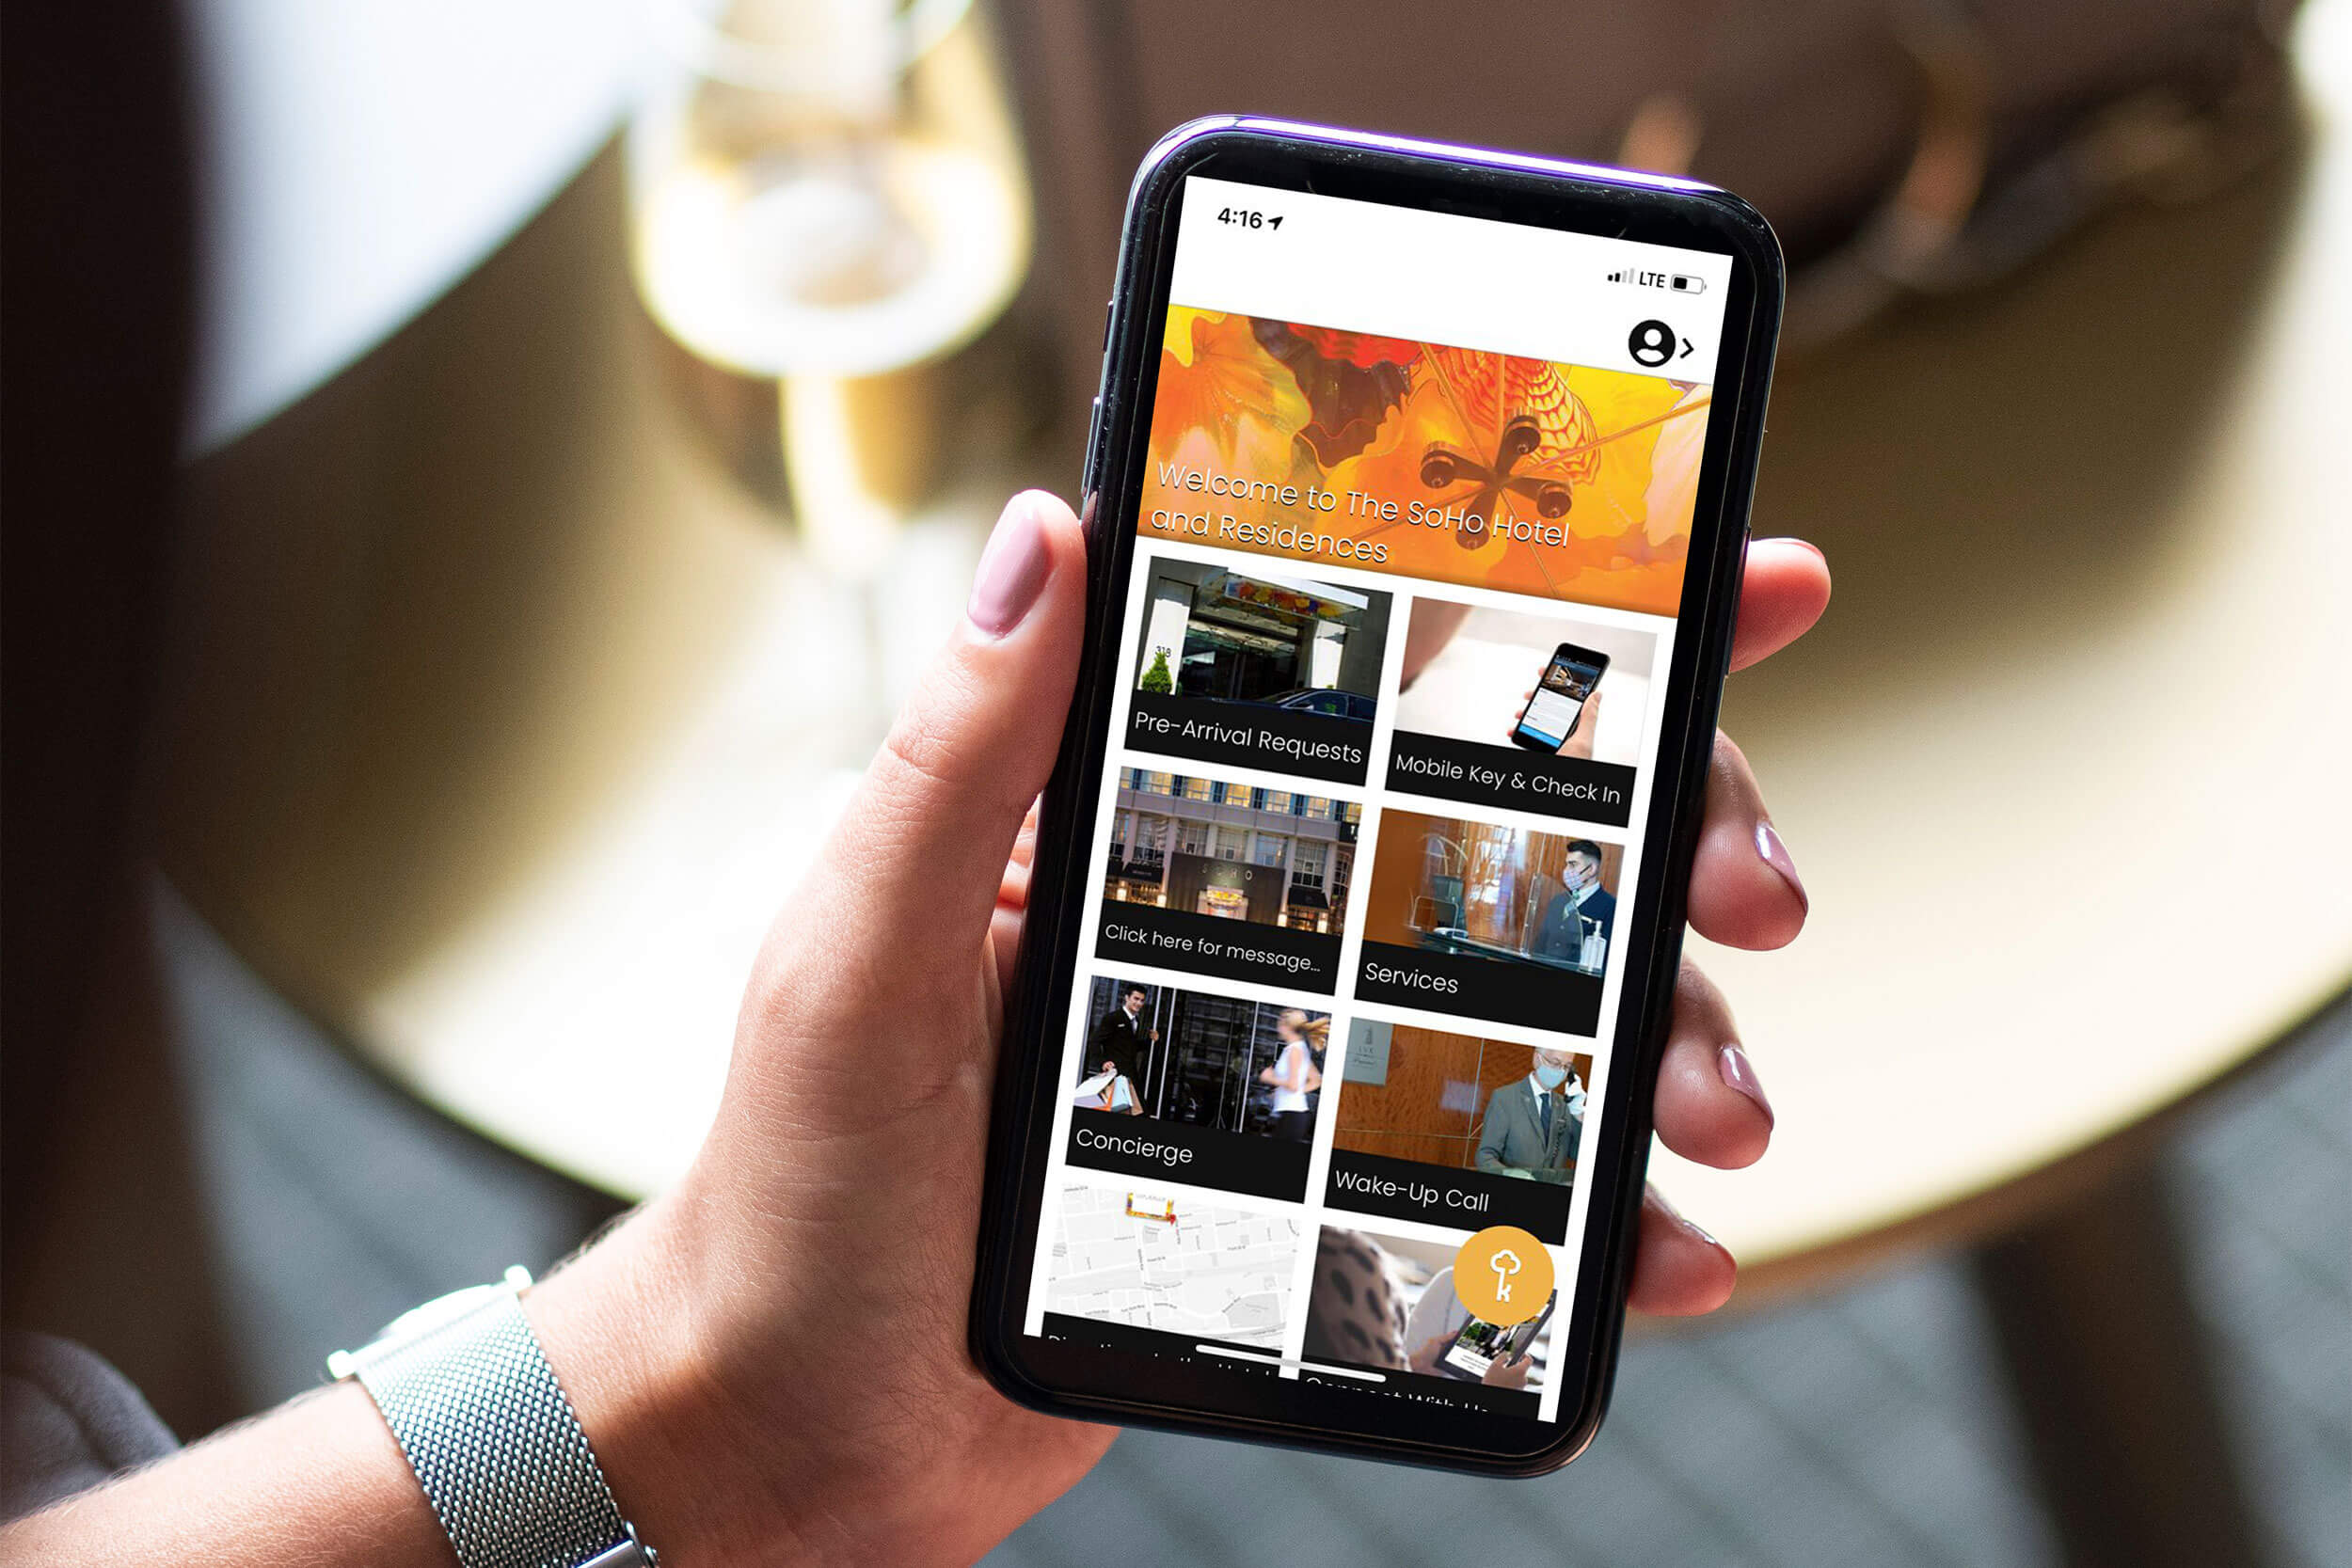 The New SoHo Hotel App is here!